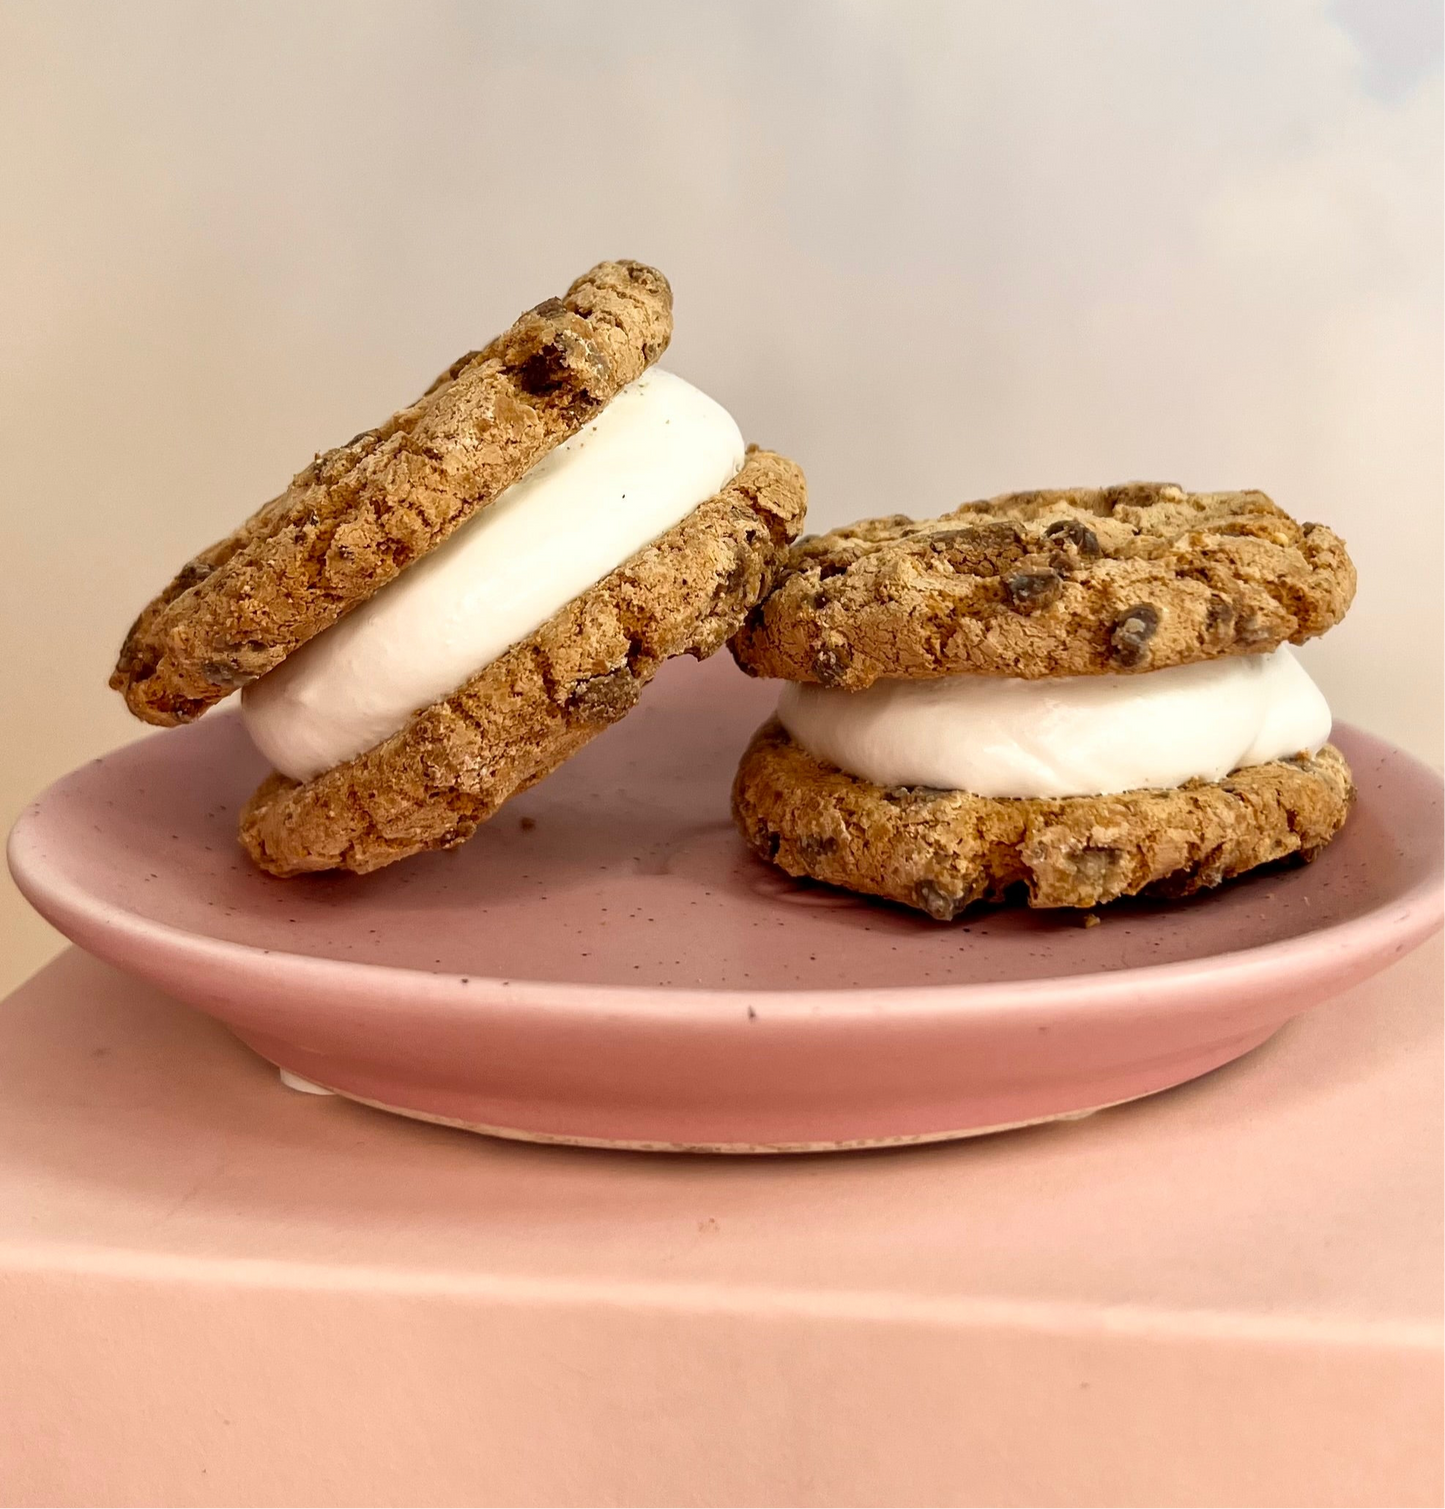 Choc chip cookie sandwich with marshmallow filling